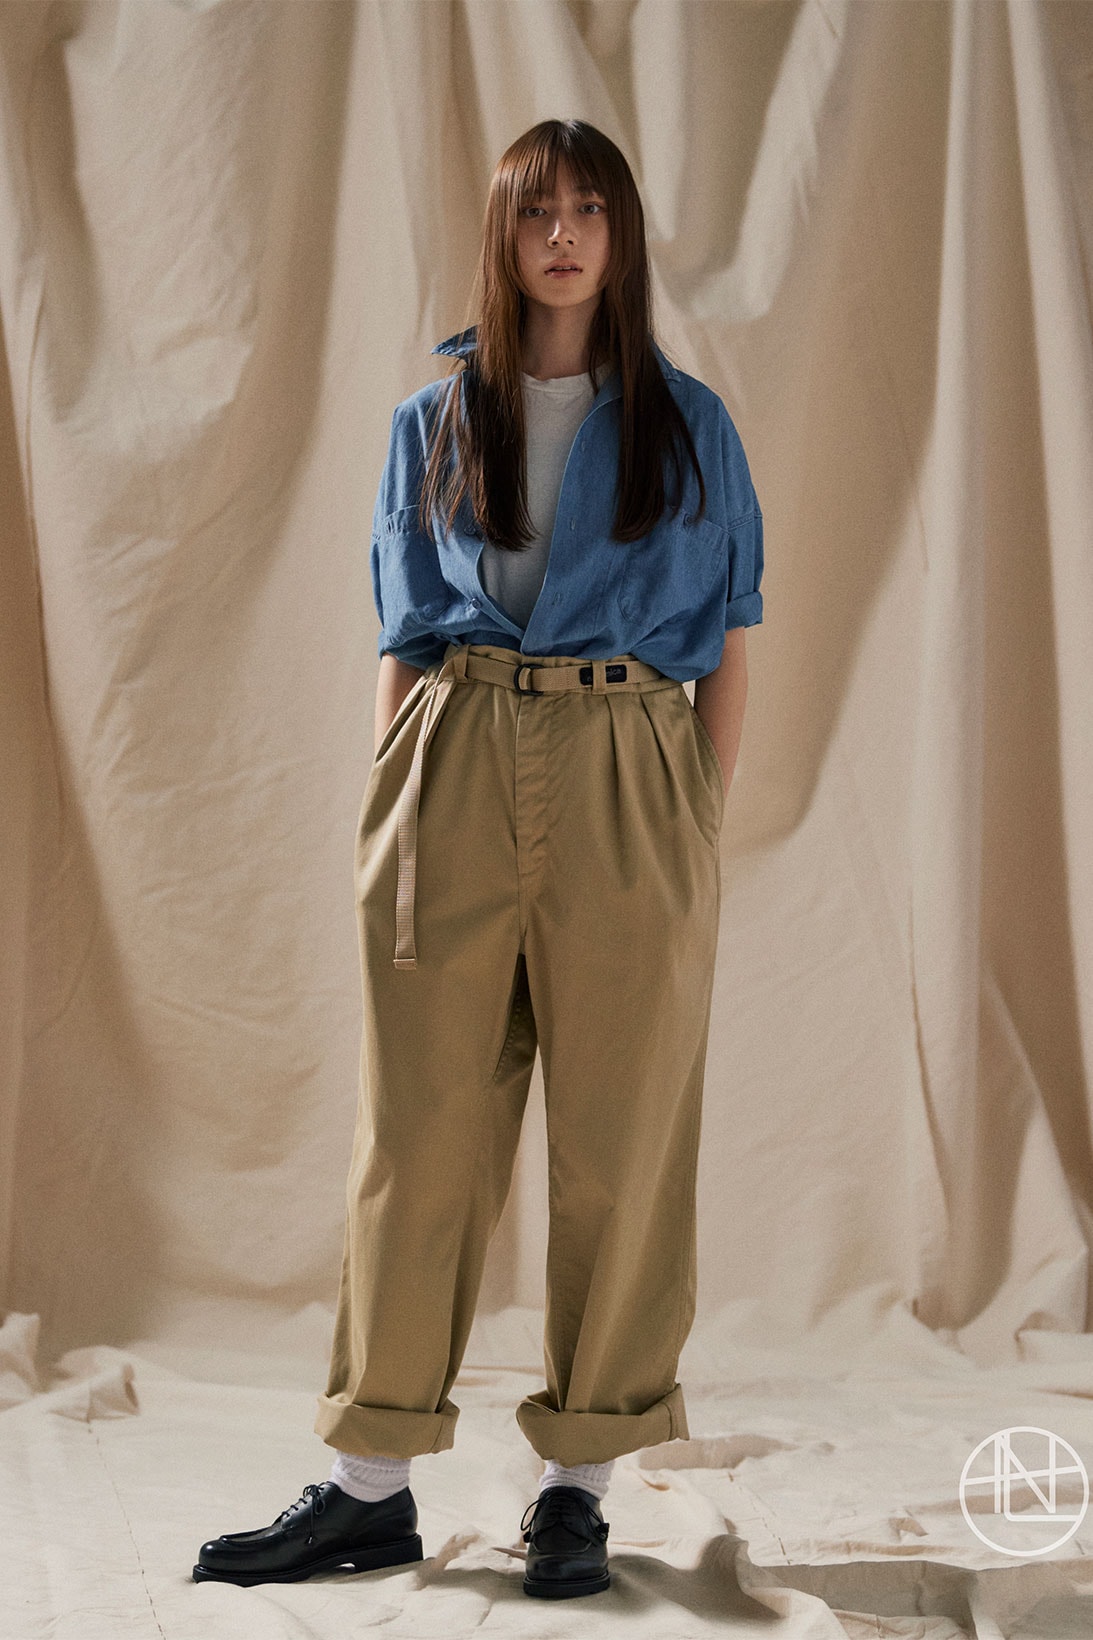 nanamica Spring Summer Collection "One Ocean, All Lands" Womenswear Lookbook Release